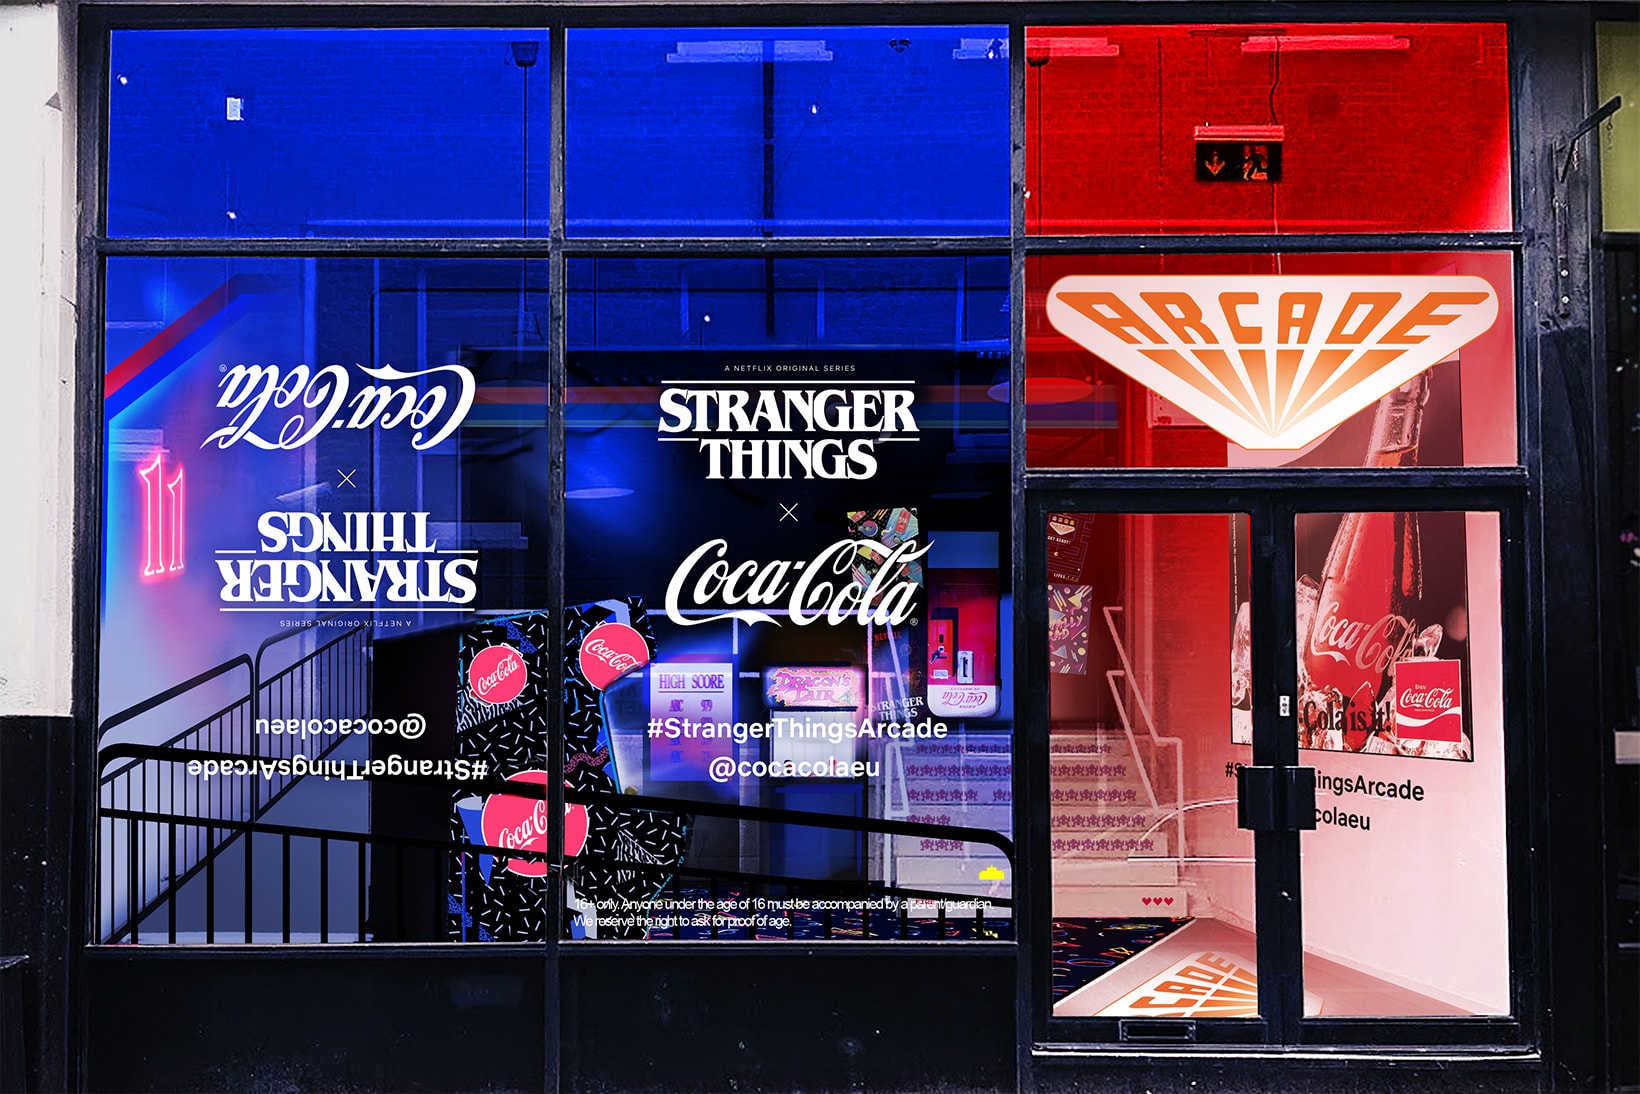 Stranger Things 3 Coca-Cola London Shoreditch 80s Arcade Pop-Up New Coke Cans Upside Down